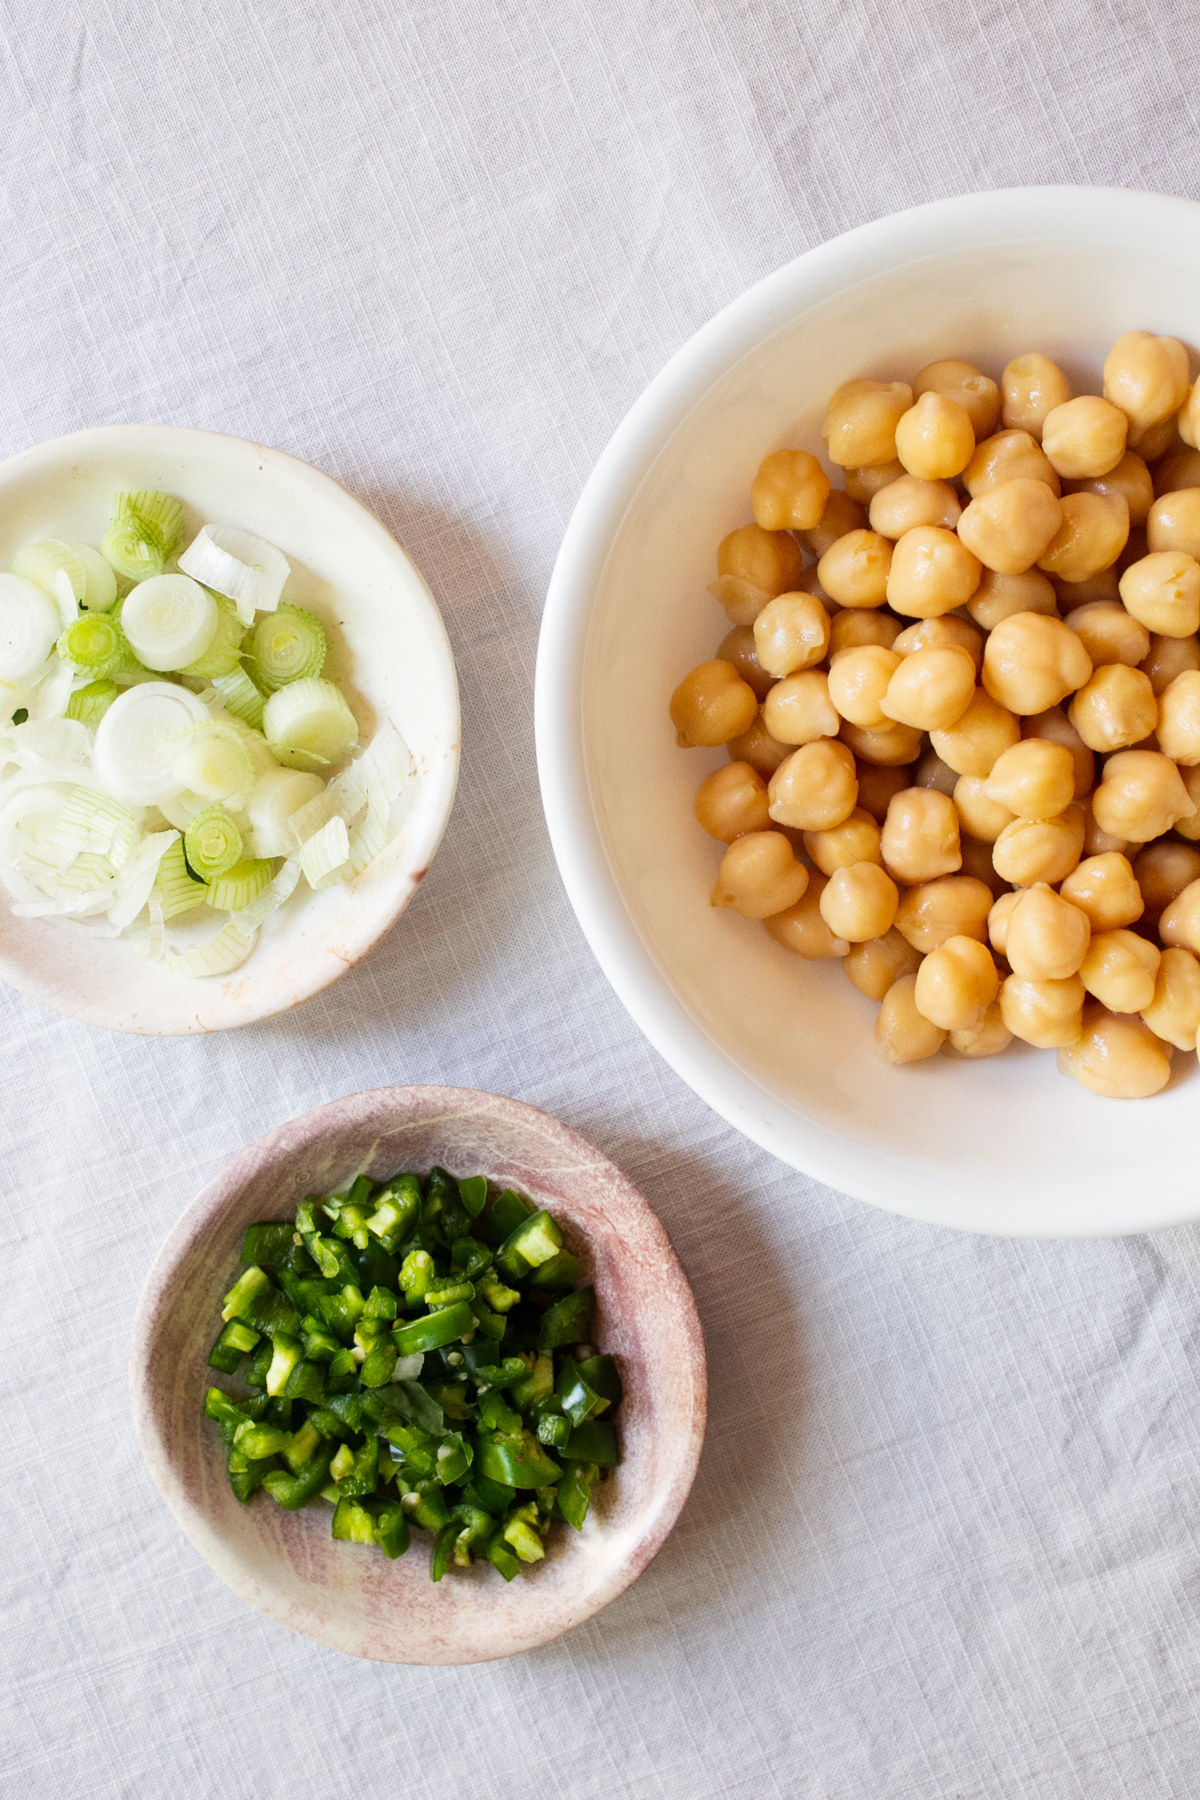 A bowl of drained chickpeas, chopped spring onions and green chlies